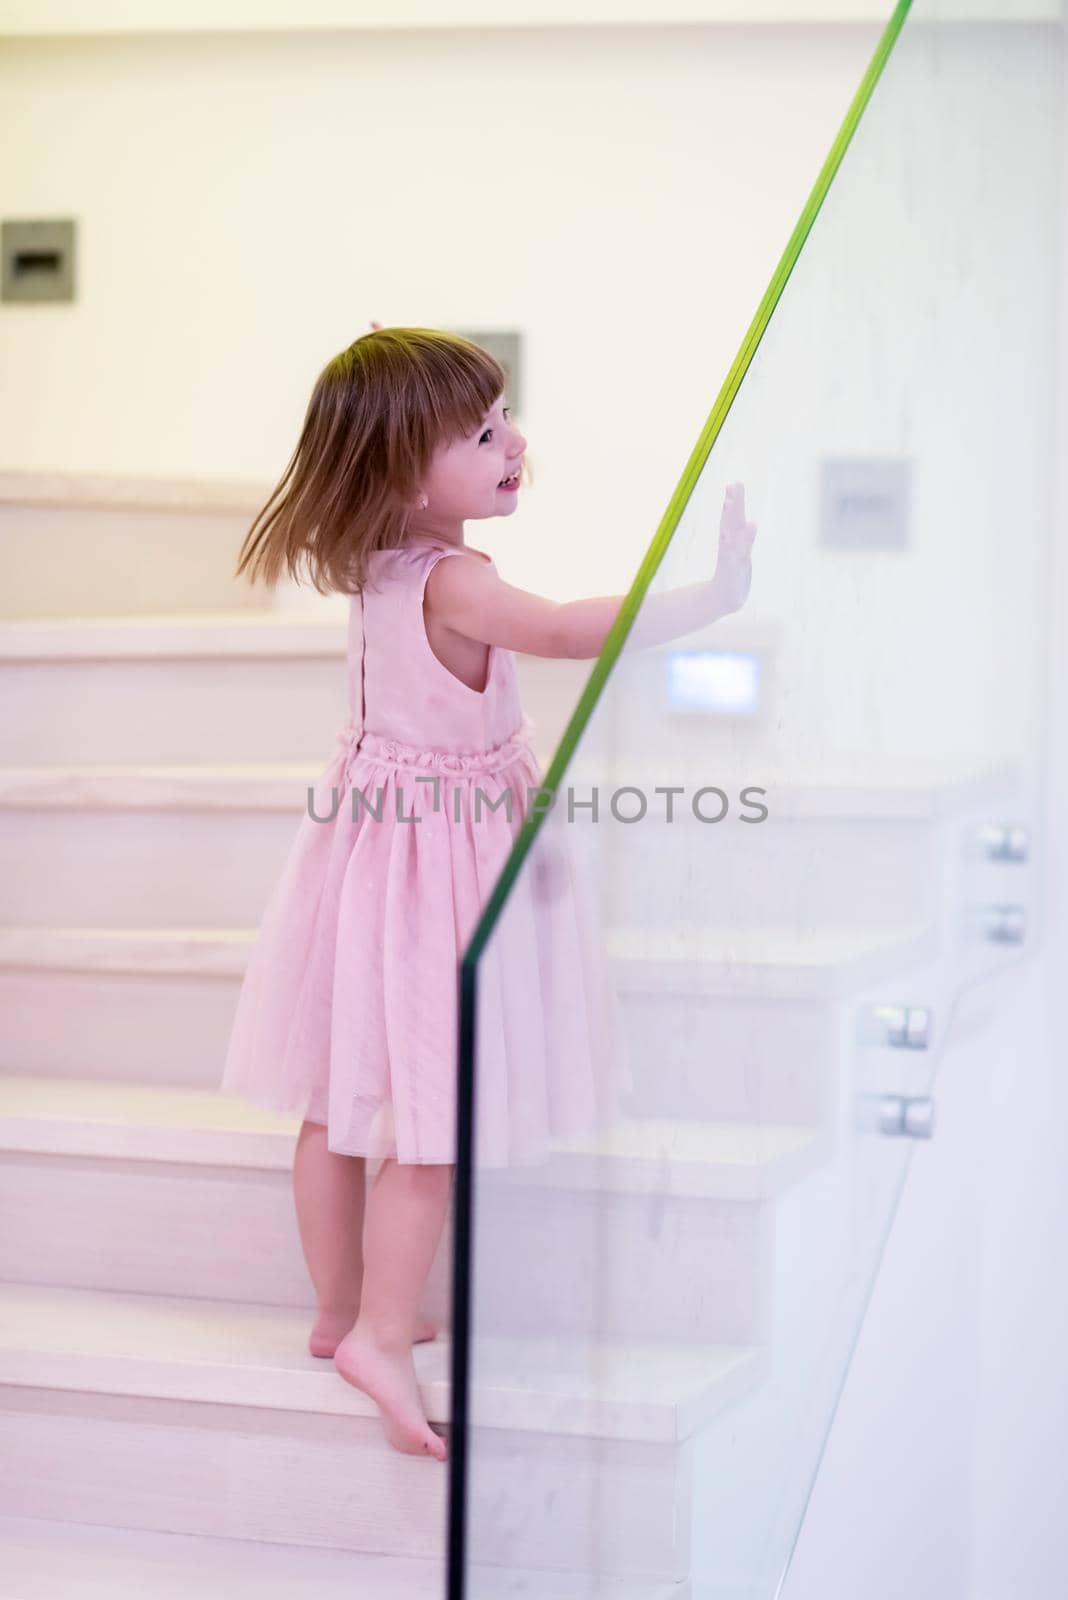 little girl playing on stairs at home by dotshock